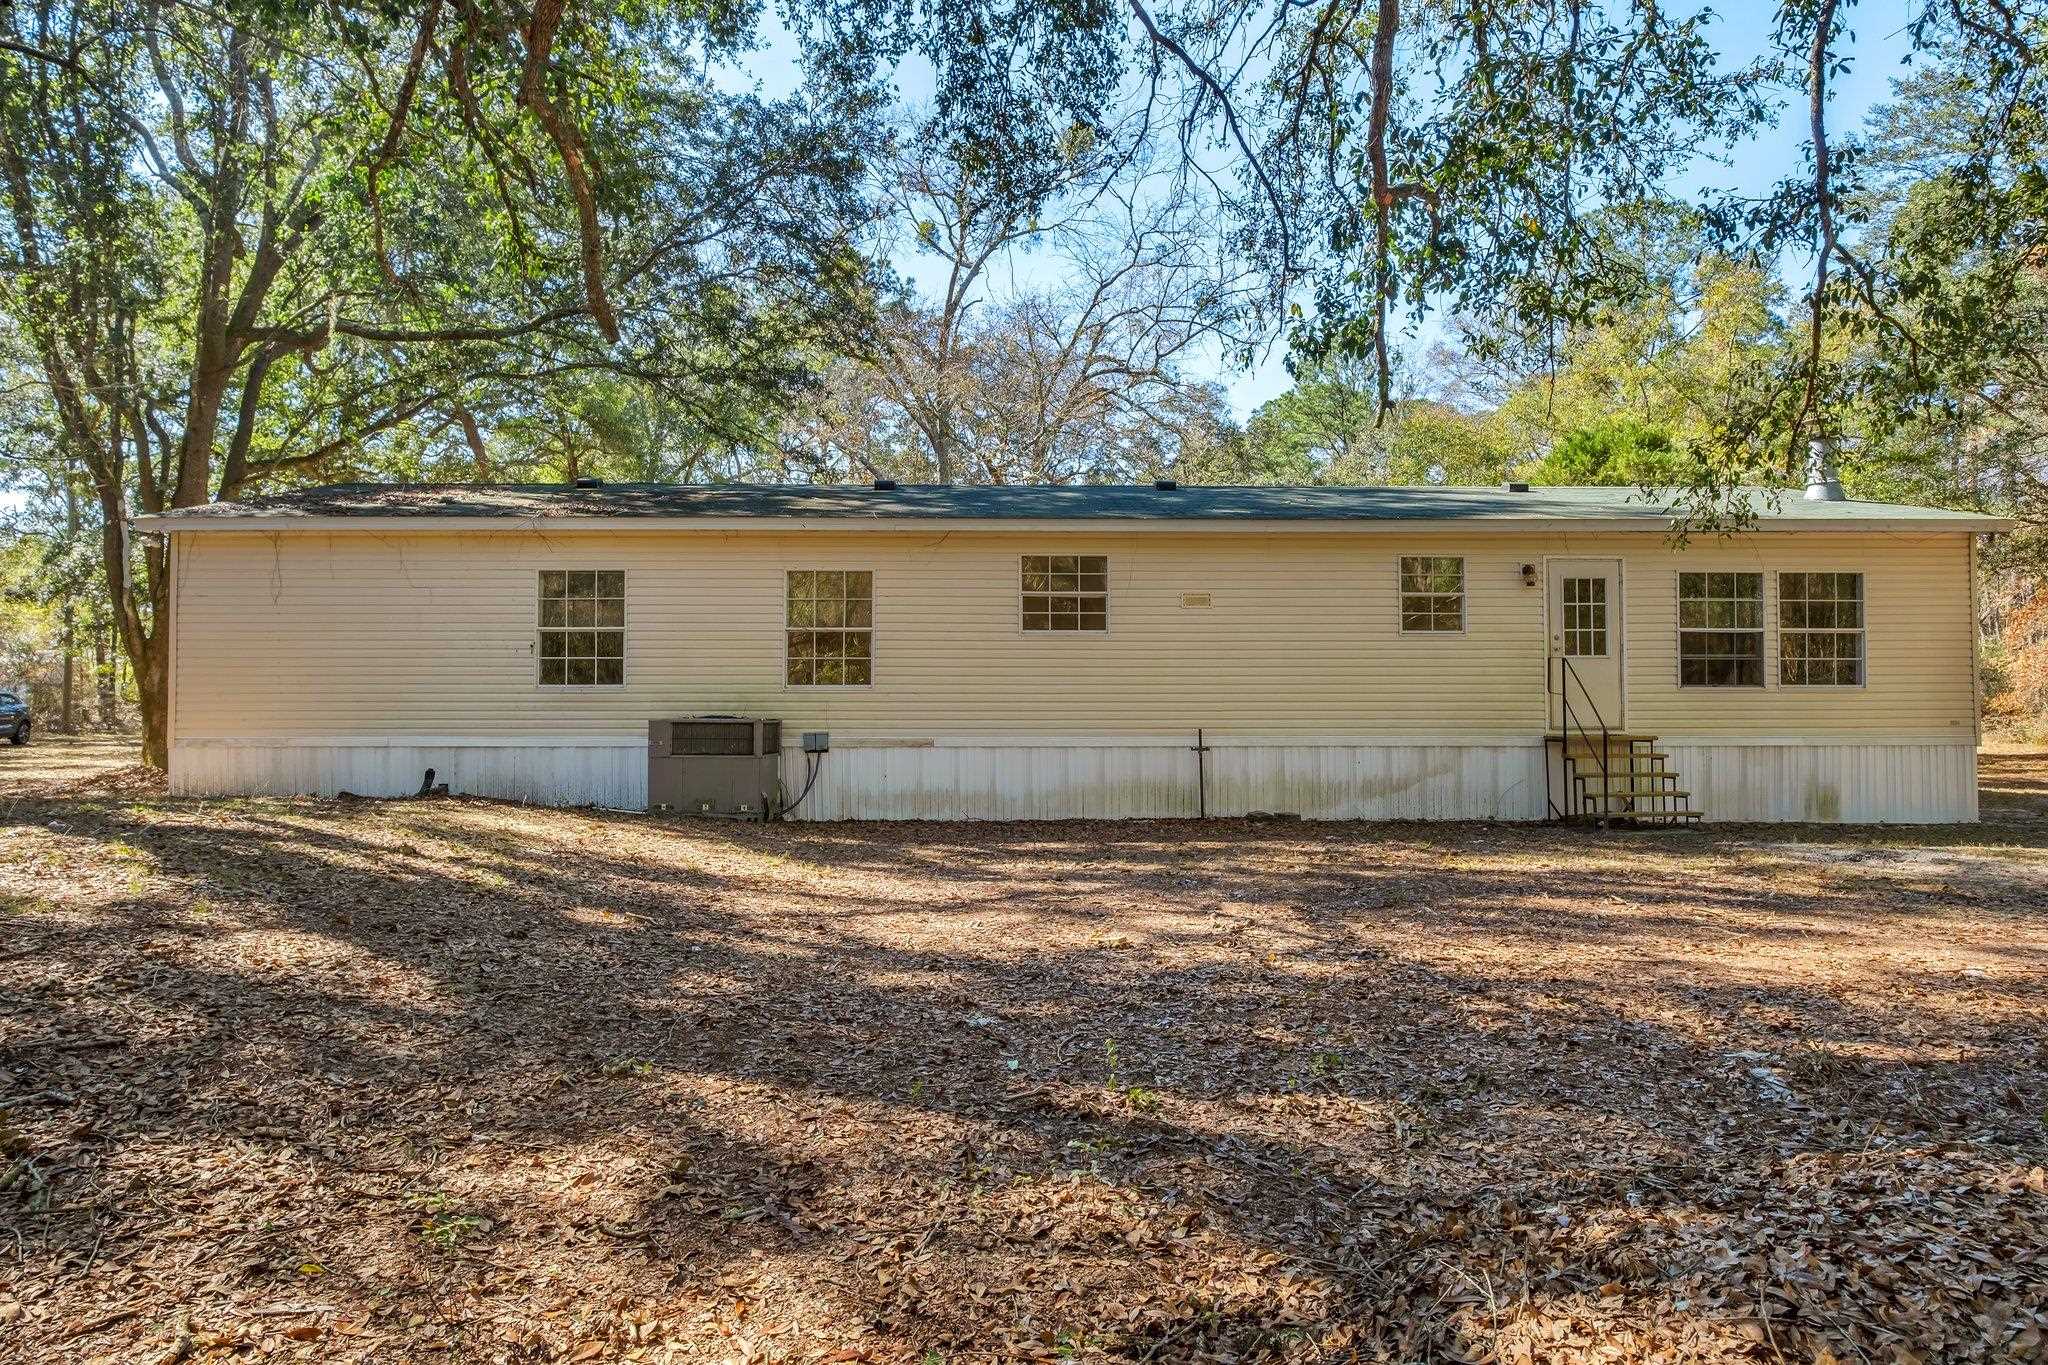 3583 Whippoorwill,TALLAHASSEE,Florida 32310,4 Bedrooms Bedrooms,2 BathroomsBathrooms,Manuf/mobile home,3583 Whippoorwill,368193